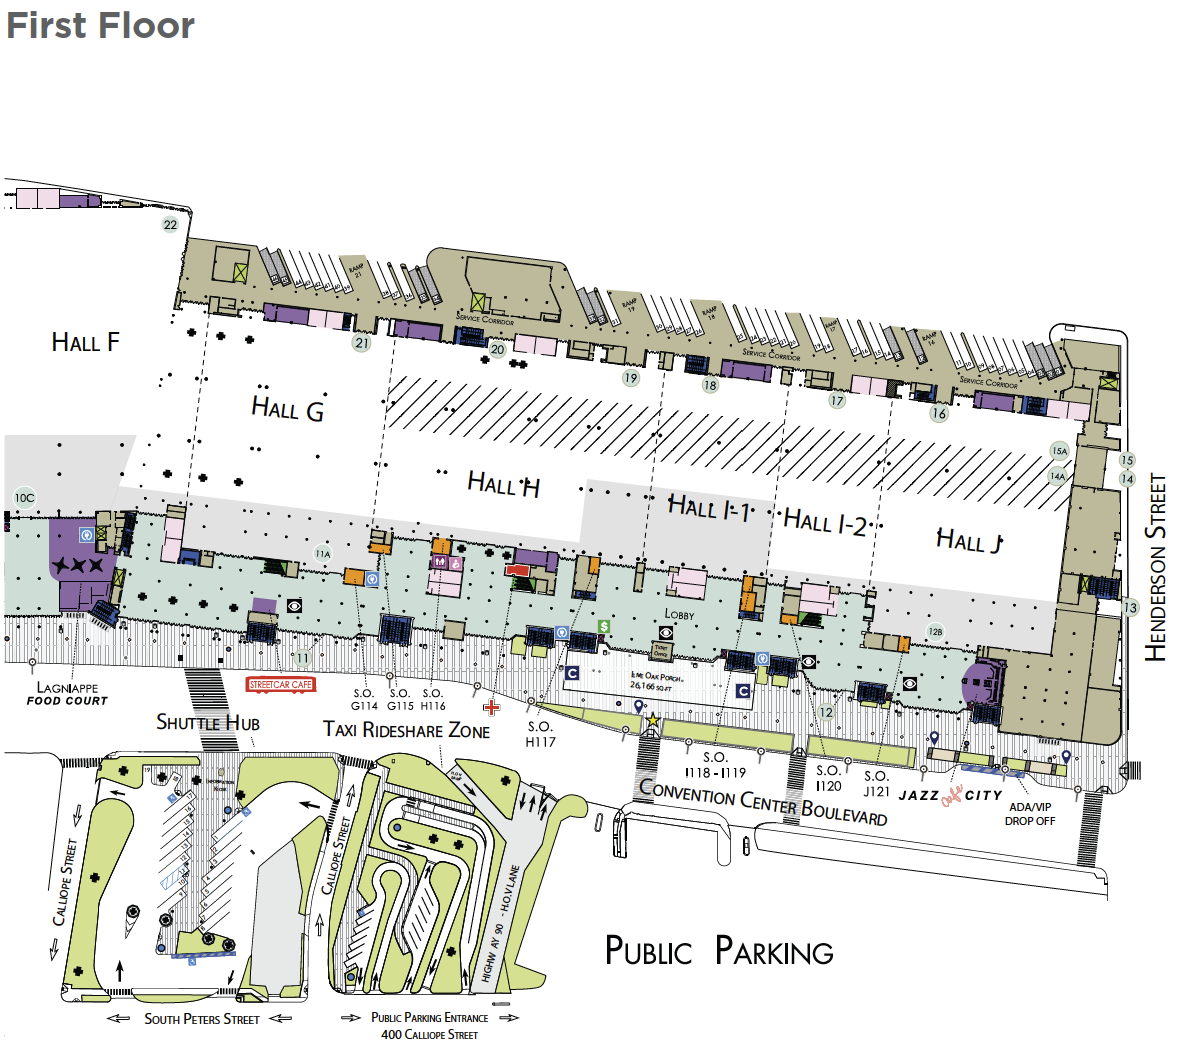 First Floor Map of Morial Convention Center